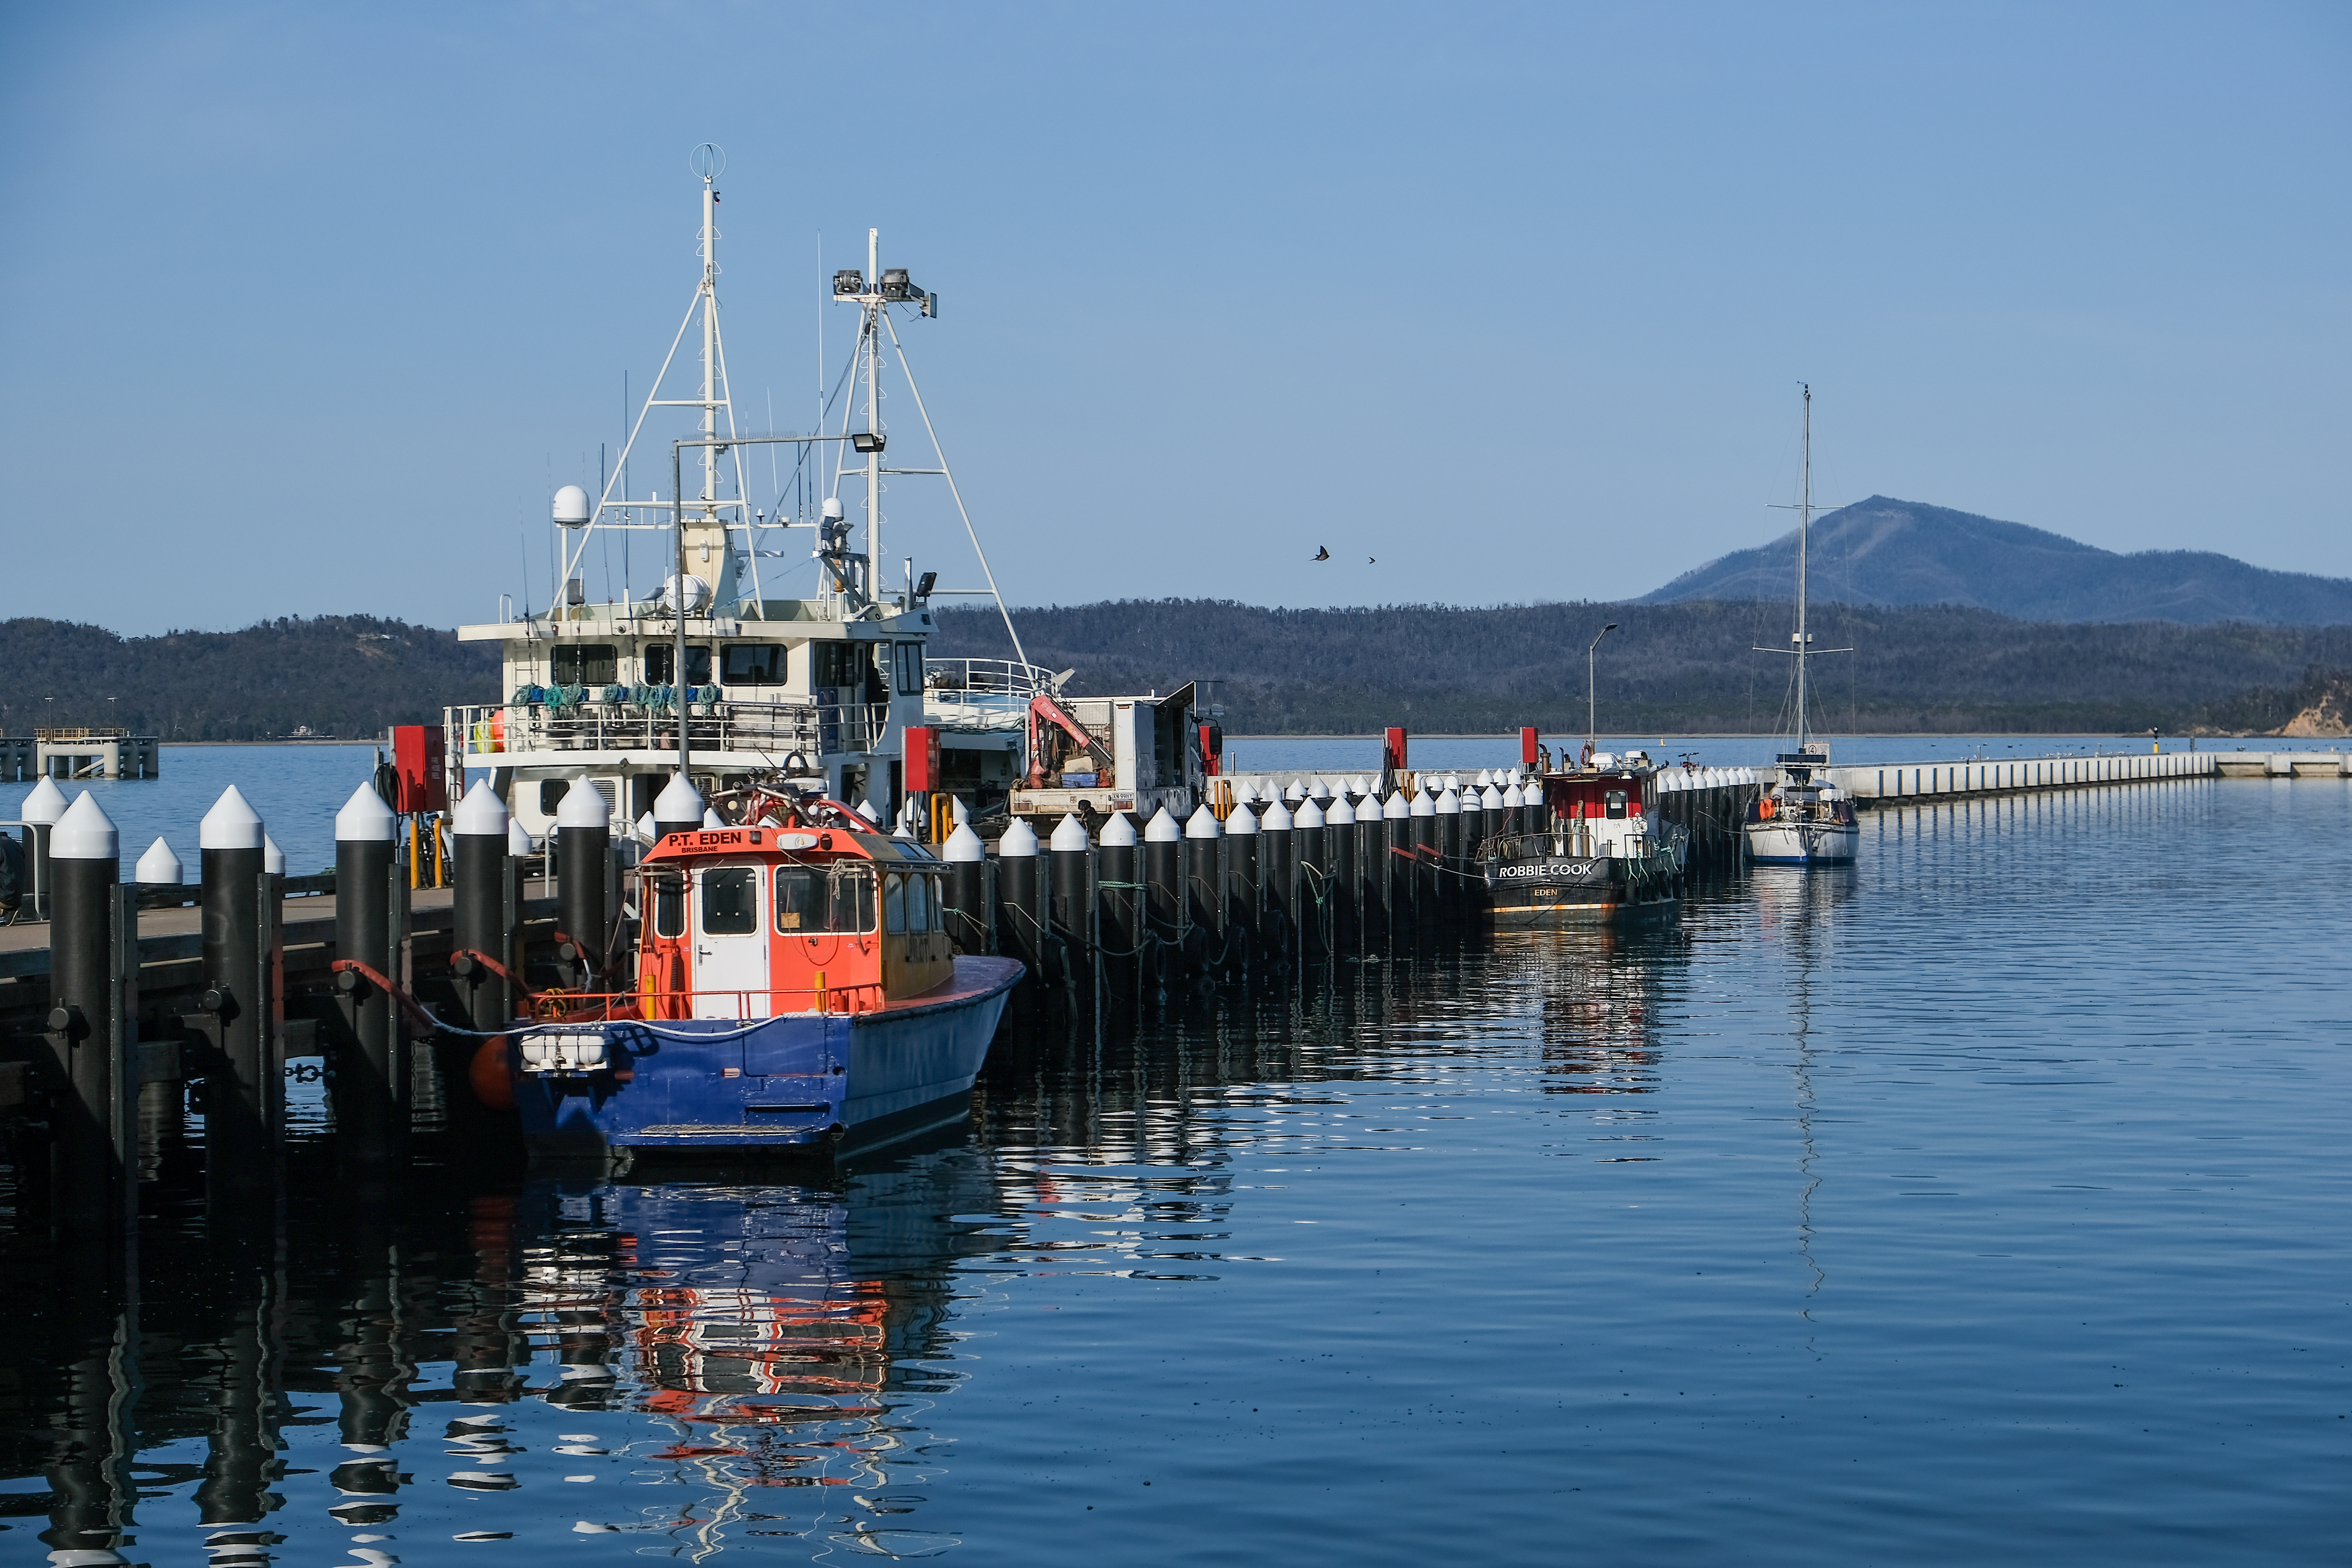 Wharf with boats, mountain in the background. Blue sky. Eden, NSW